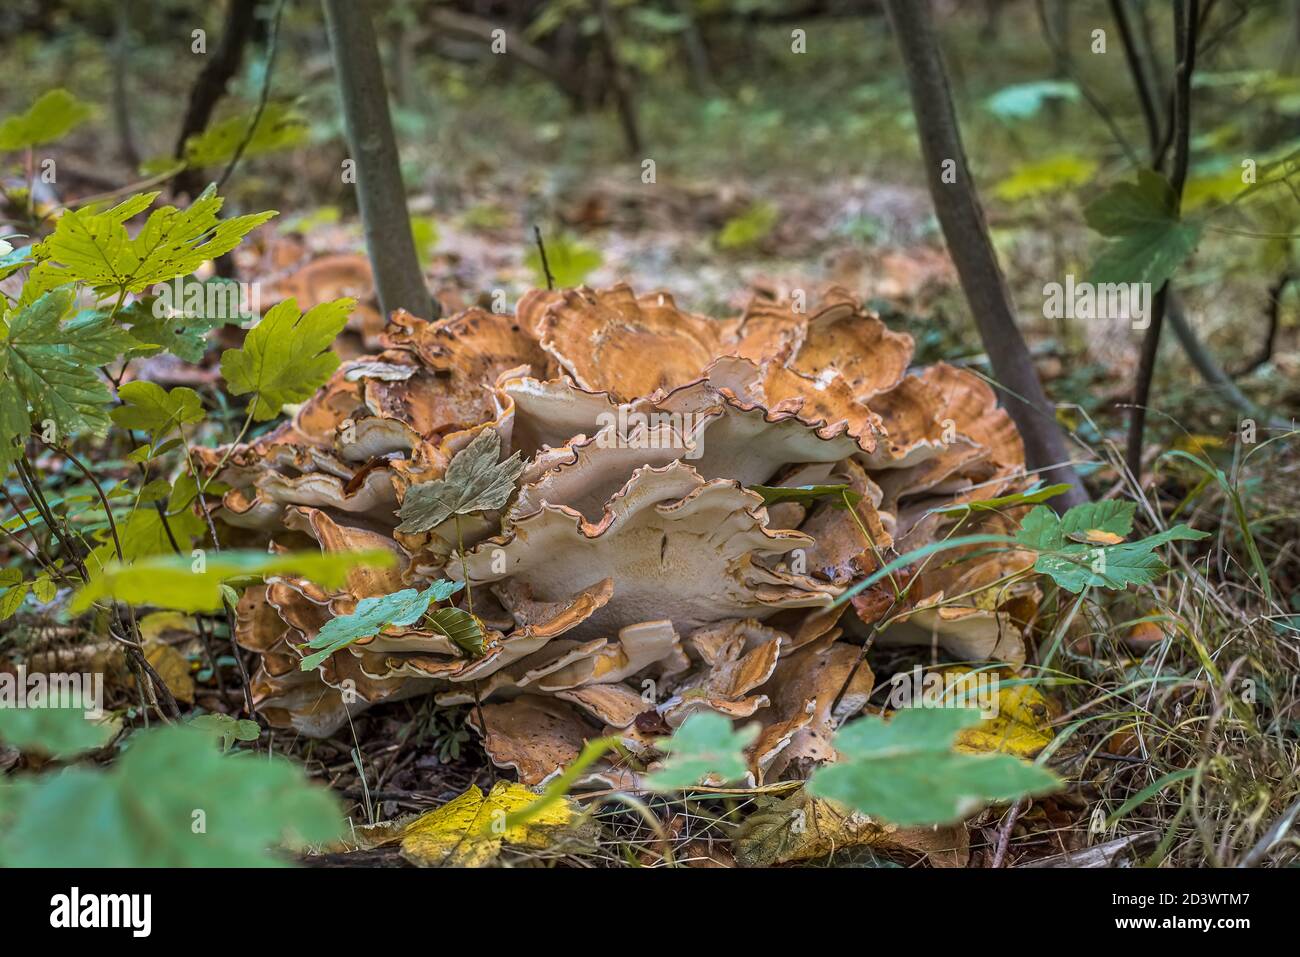 Tasty eatable mushroom on an oak-branch on the ground, called crab-of-the-woods, Jaegerspris, Denmark, October 9, 2020 Stock Photo